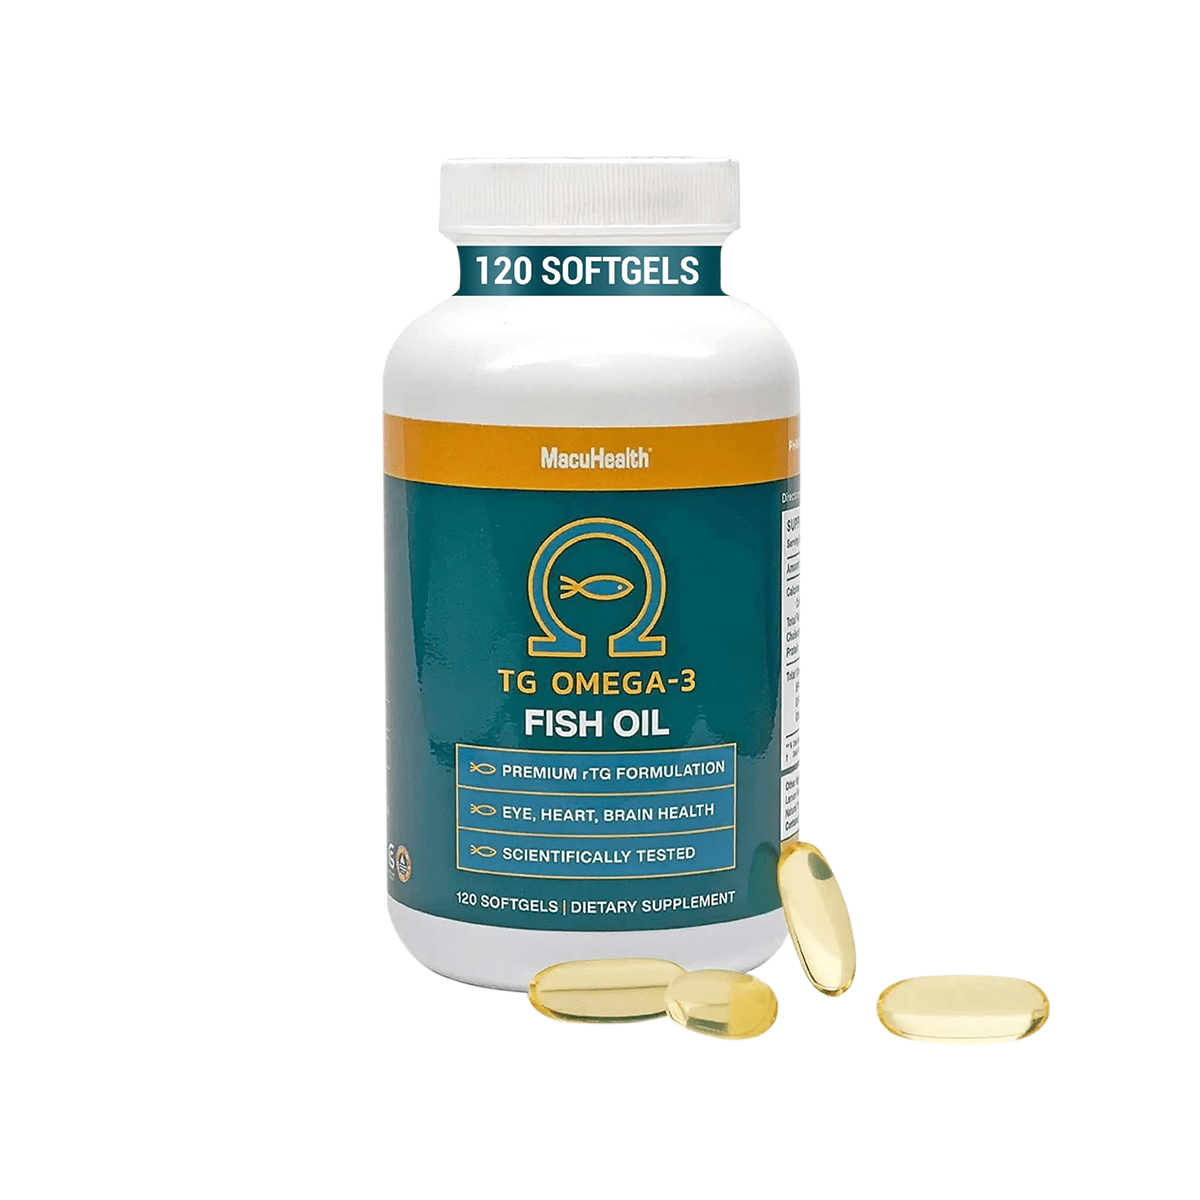 MacuHealth Omega 3 Fish Oil for support for dry eyes - 1100mg of Omega 3, 120 Softgels - Dryeye Rescue